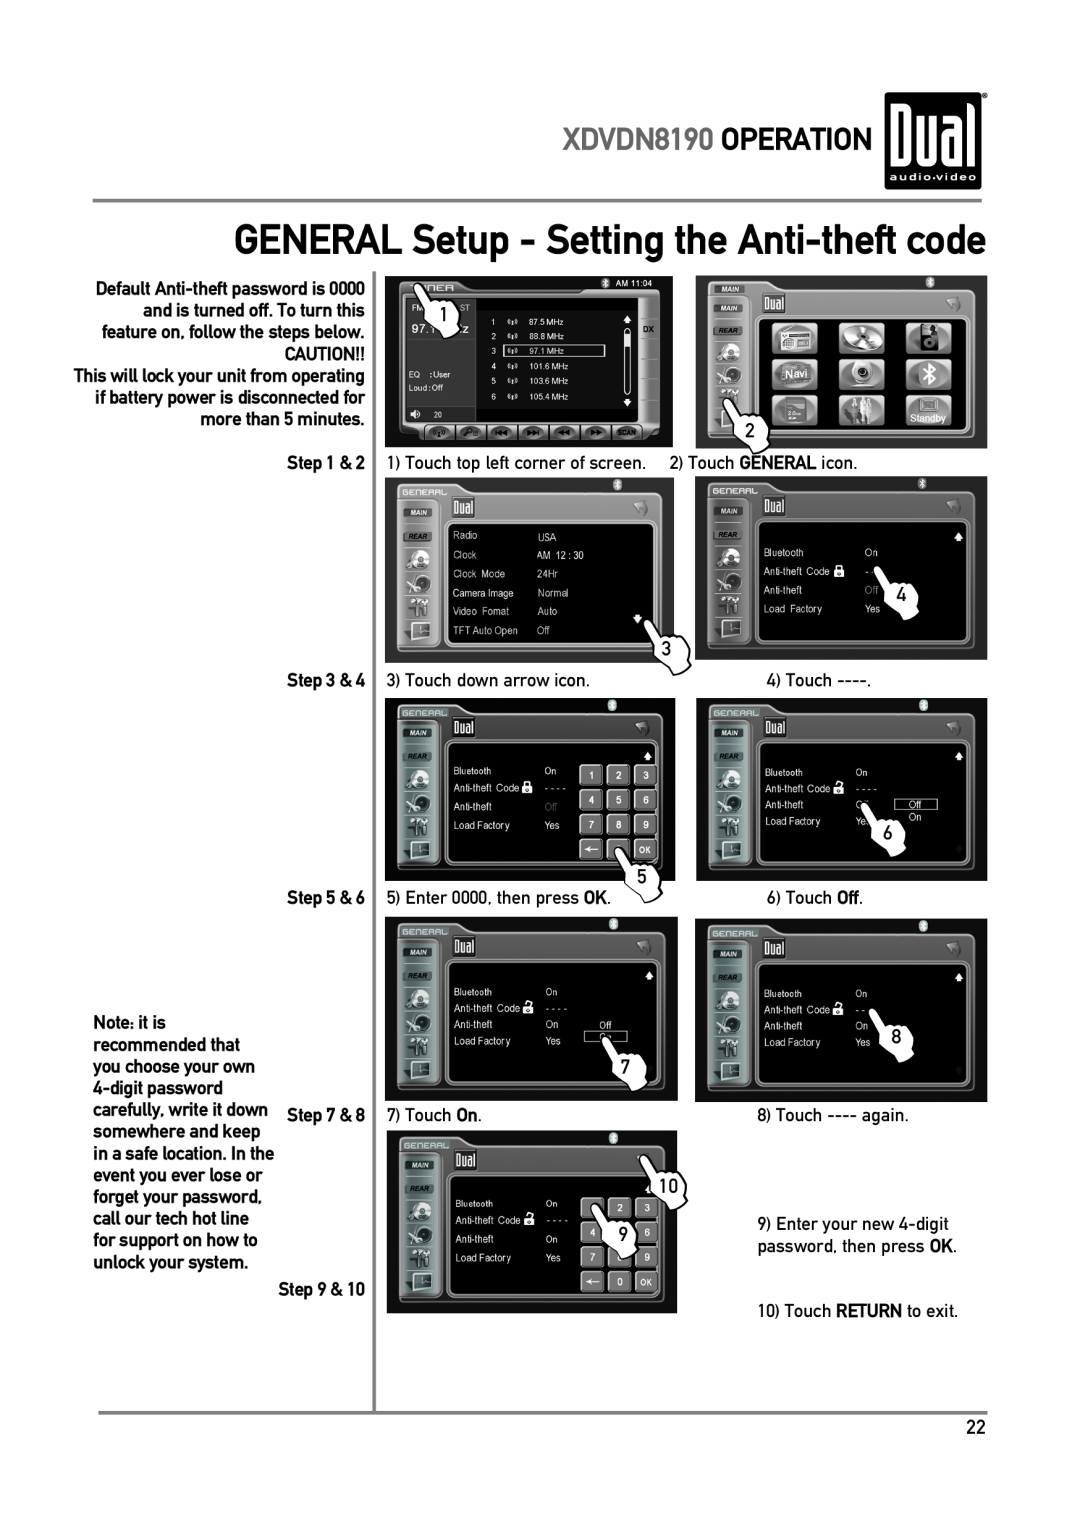 Dual owner manual GENERAL Setup - Setting the Anti-theftcode, XDVDN8190 OPERATION 